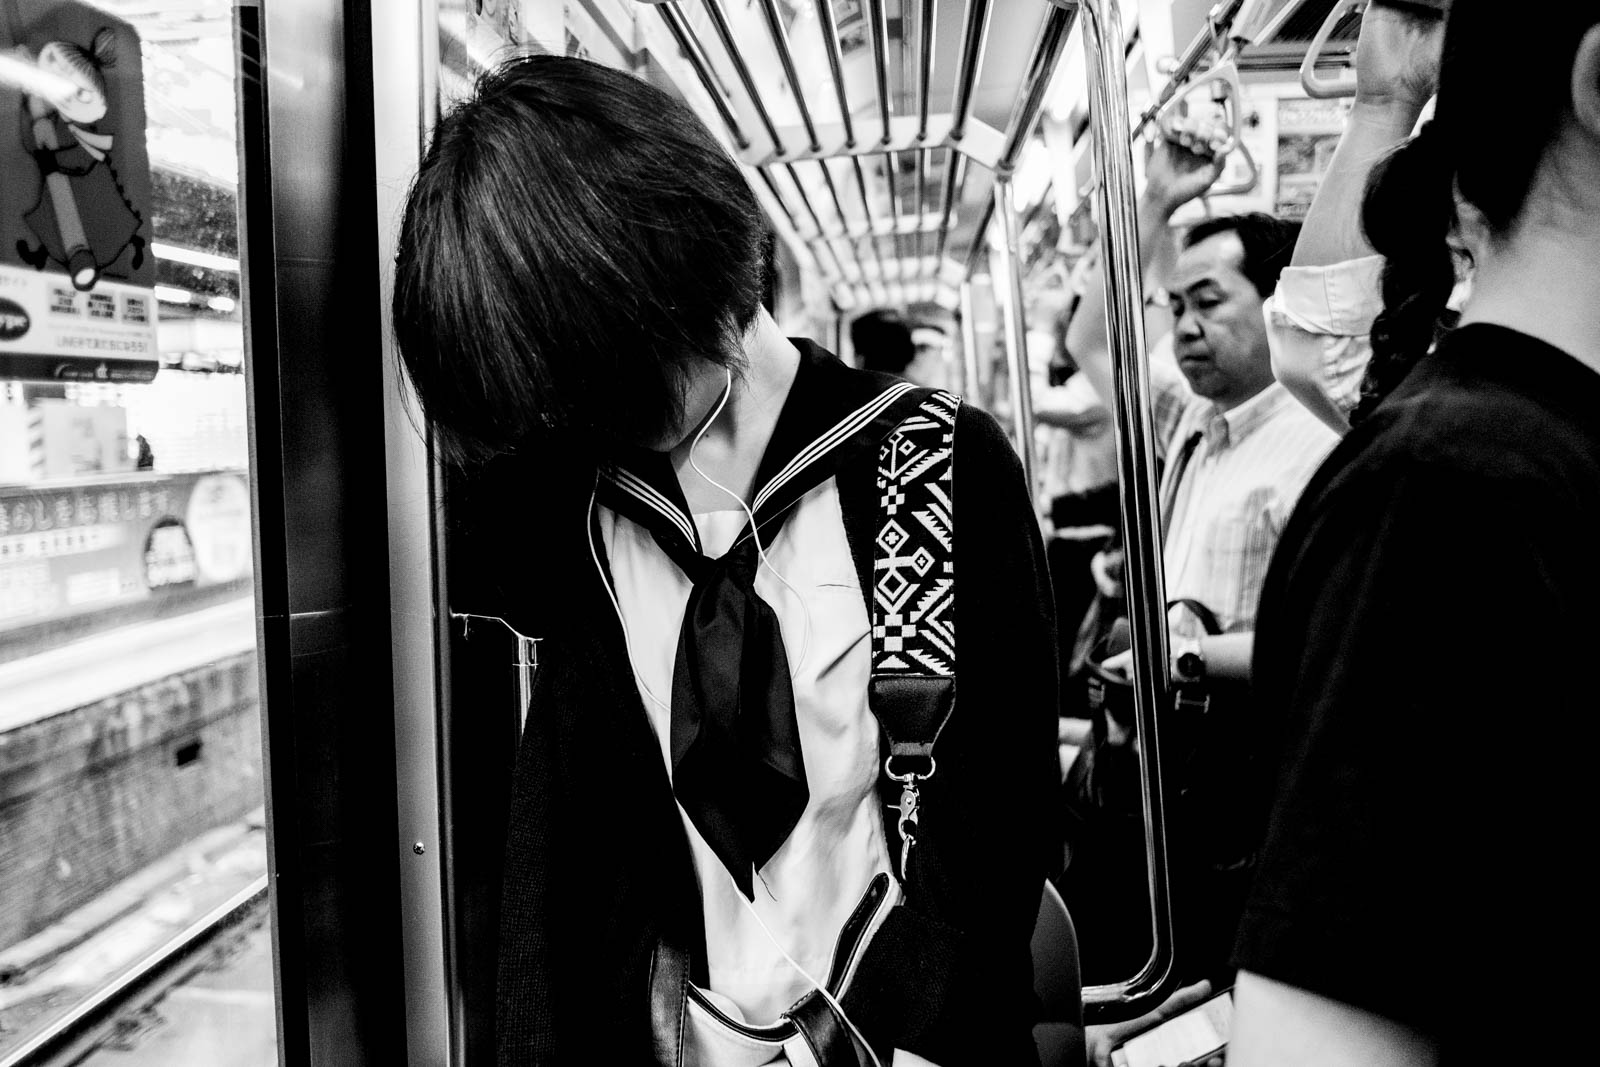 Japanese girl in metro with hair in front of her face totally secluded from her surroundings. Street photography by Victor Borst